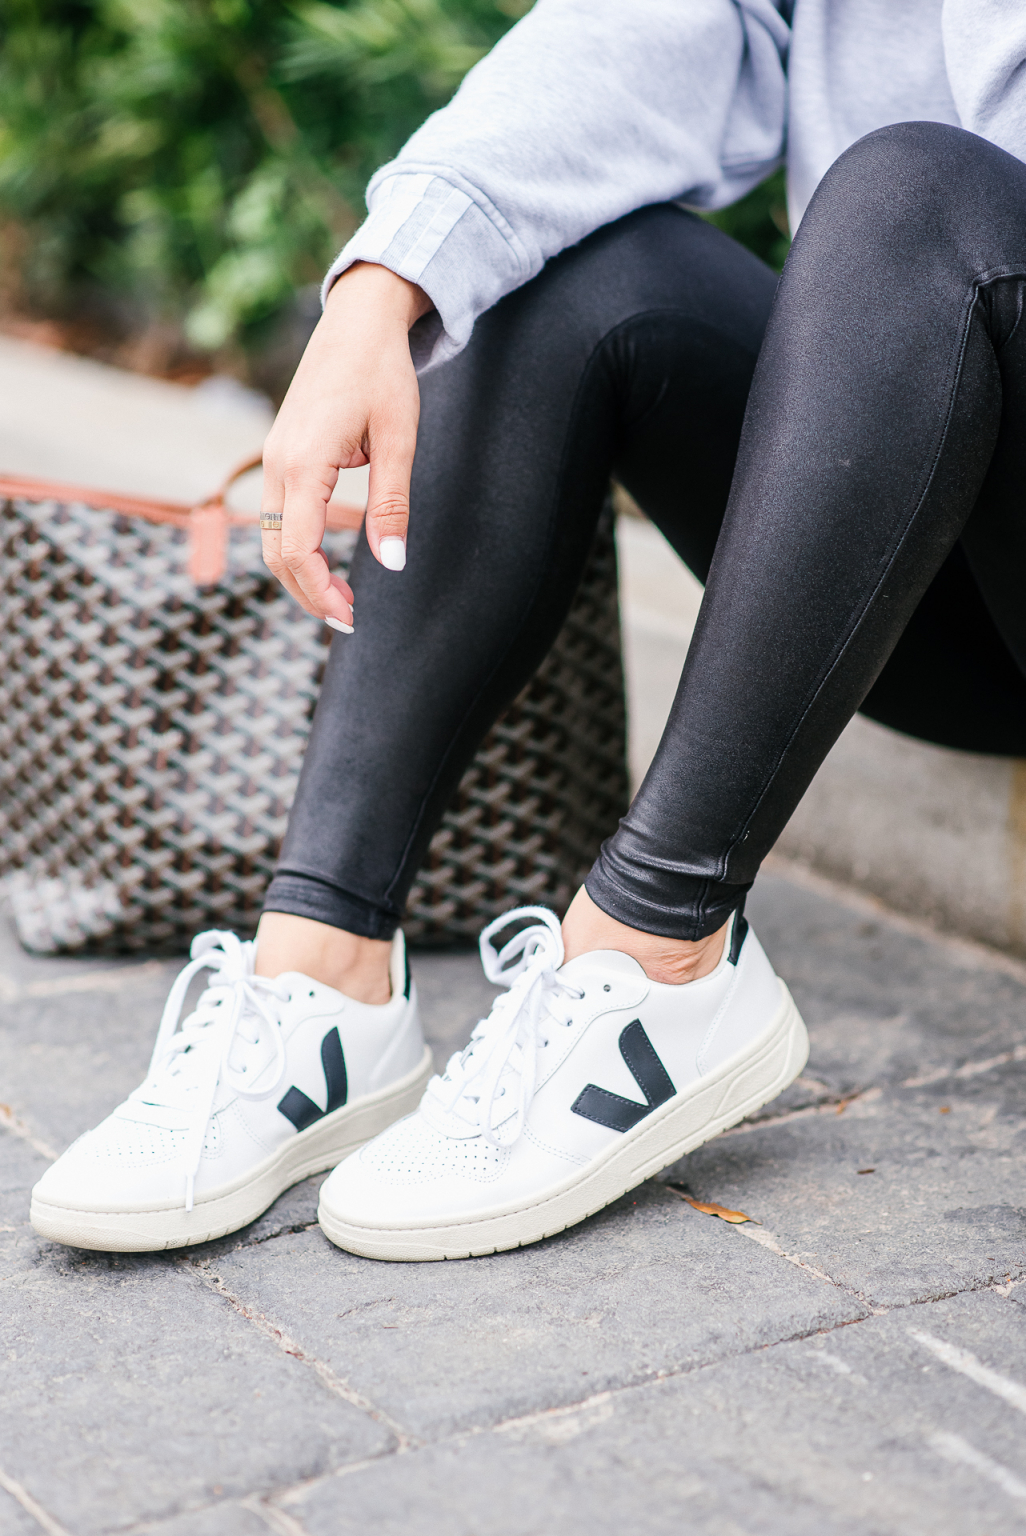 Veja Sneakers Review LuxMommy Houston Fashion, Beauty and Lifestyle